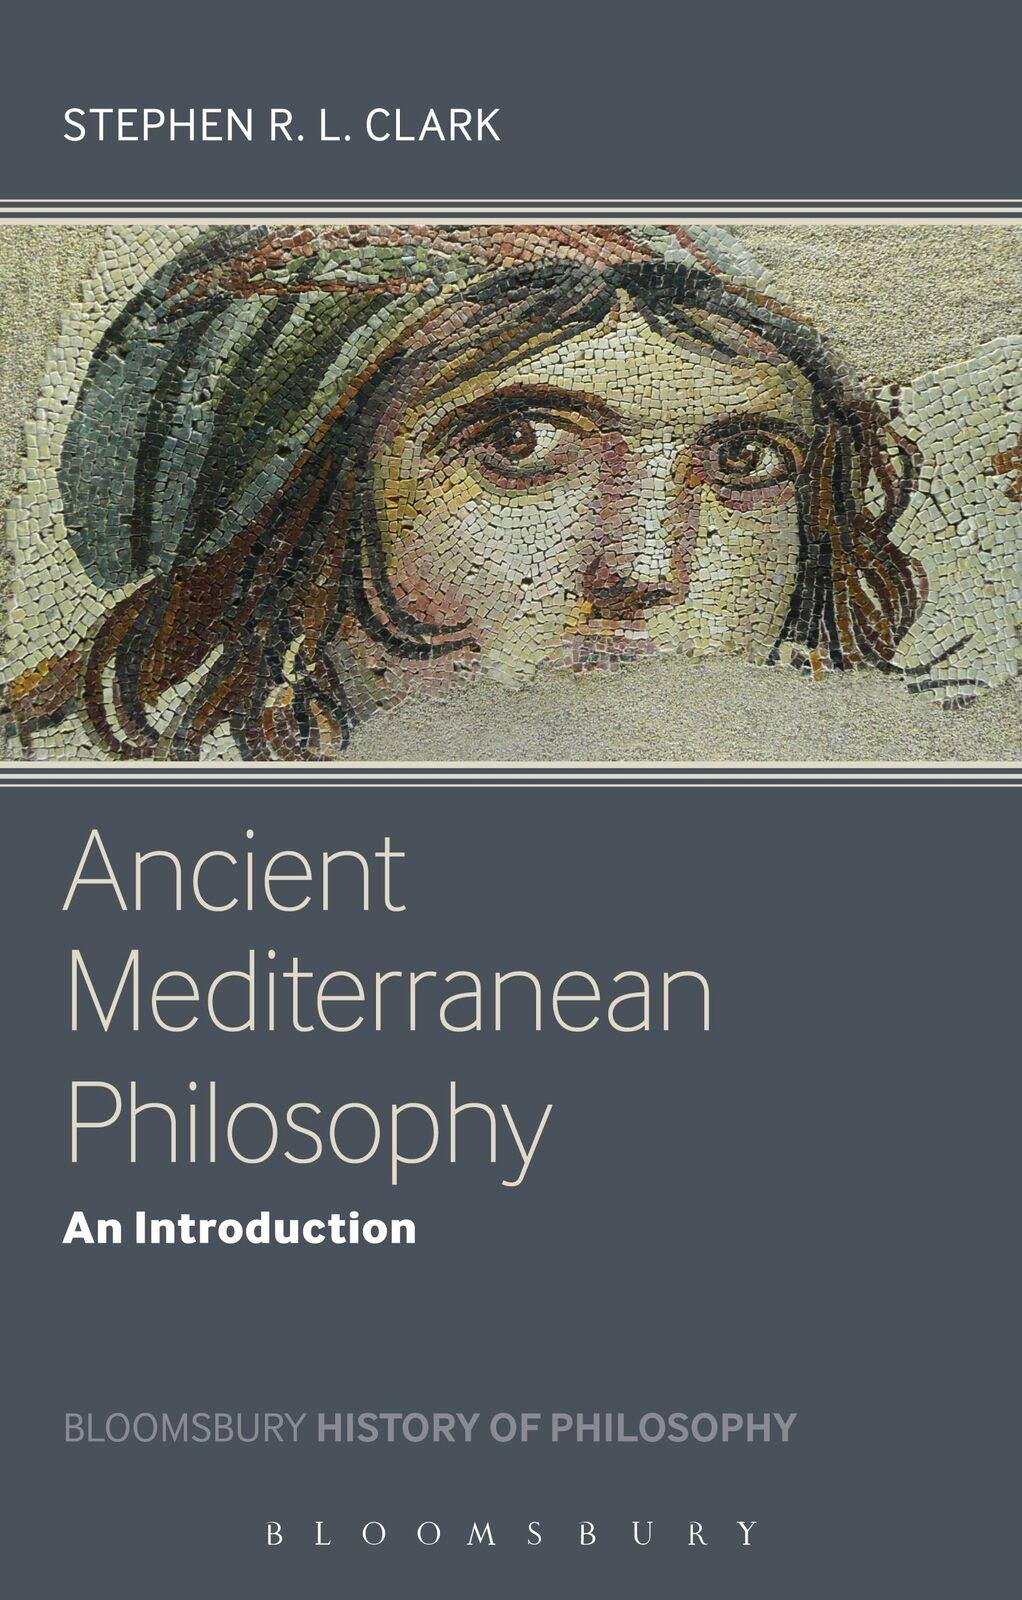 Ancient Mediterranean Philosophy: An Introduction [Book]